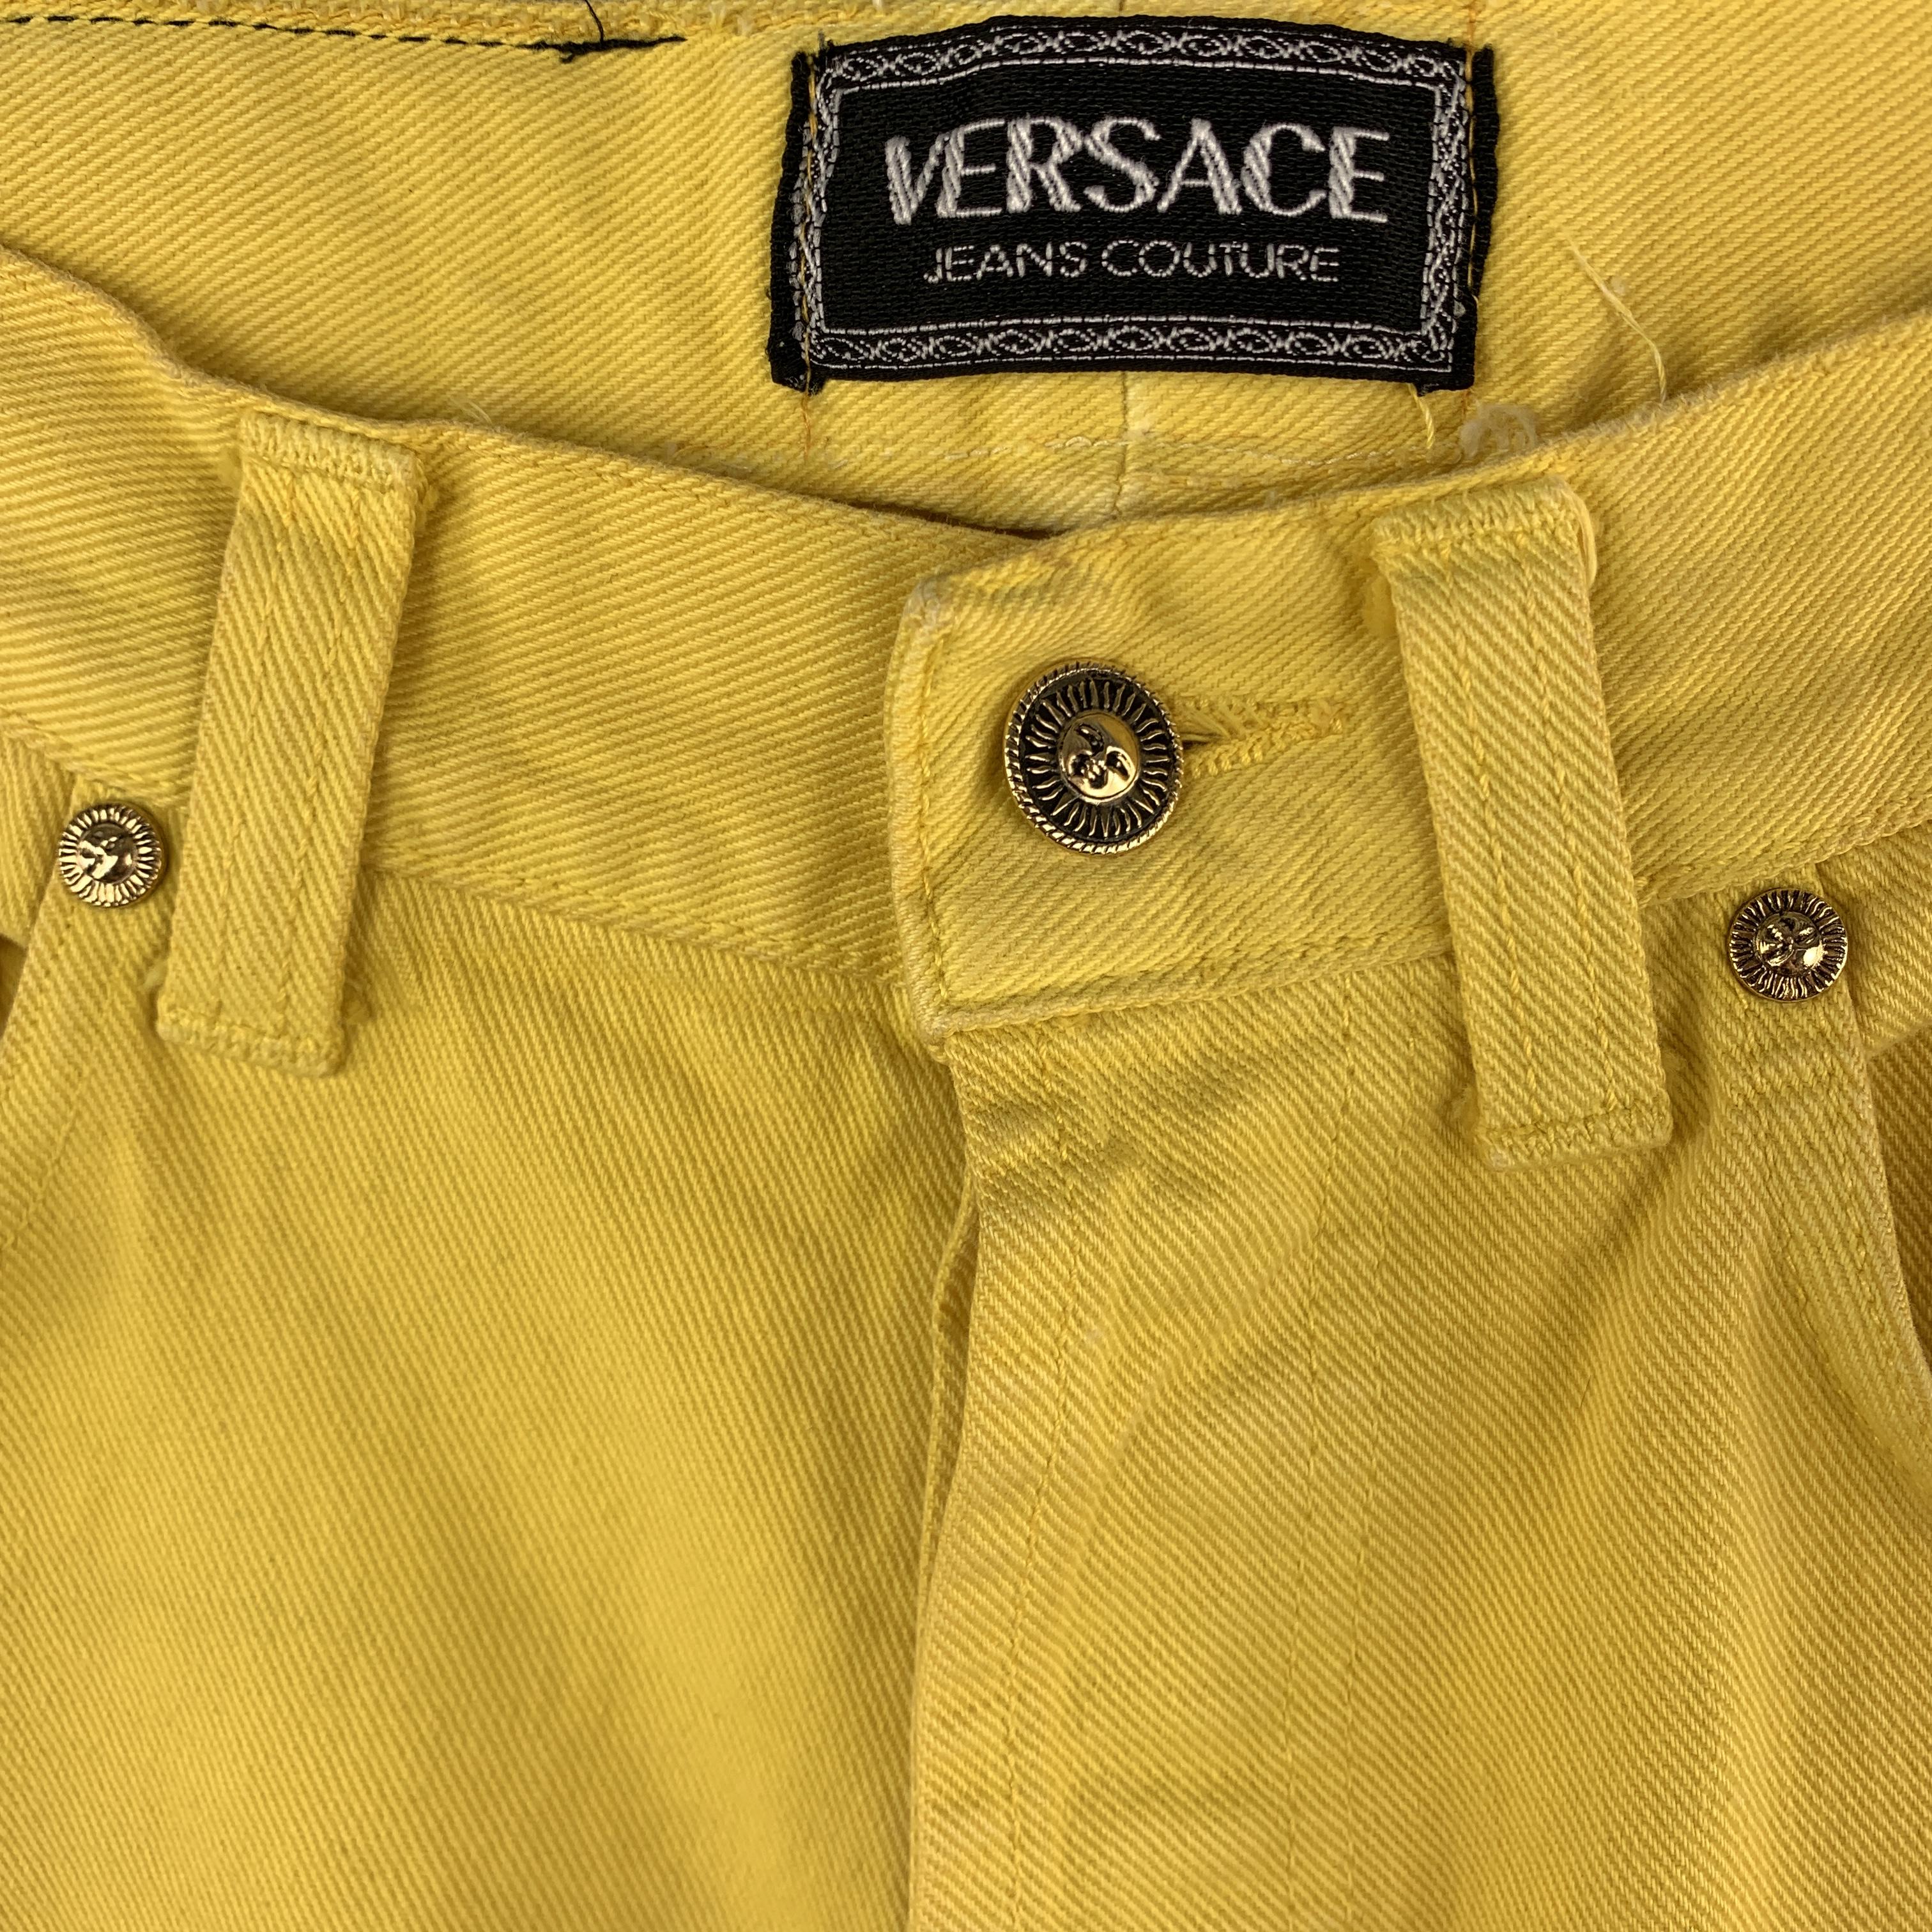 VERSACE JEANS COUTURE Size 30 Yellow Cotton Sun Button Fly Jeans 6